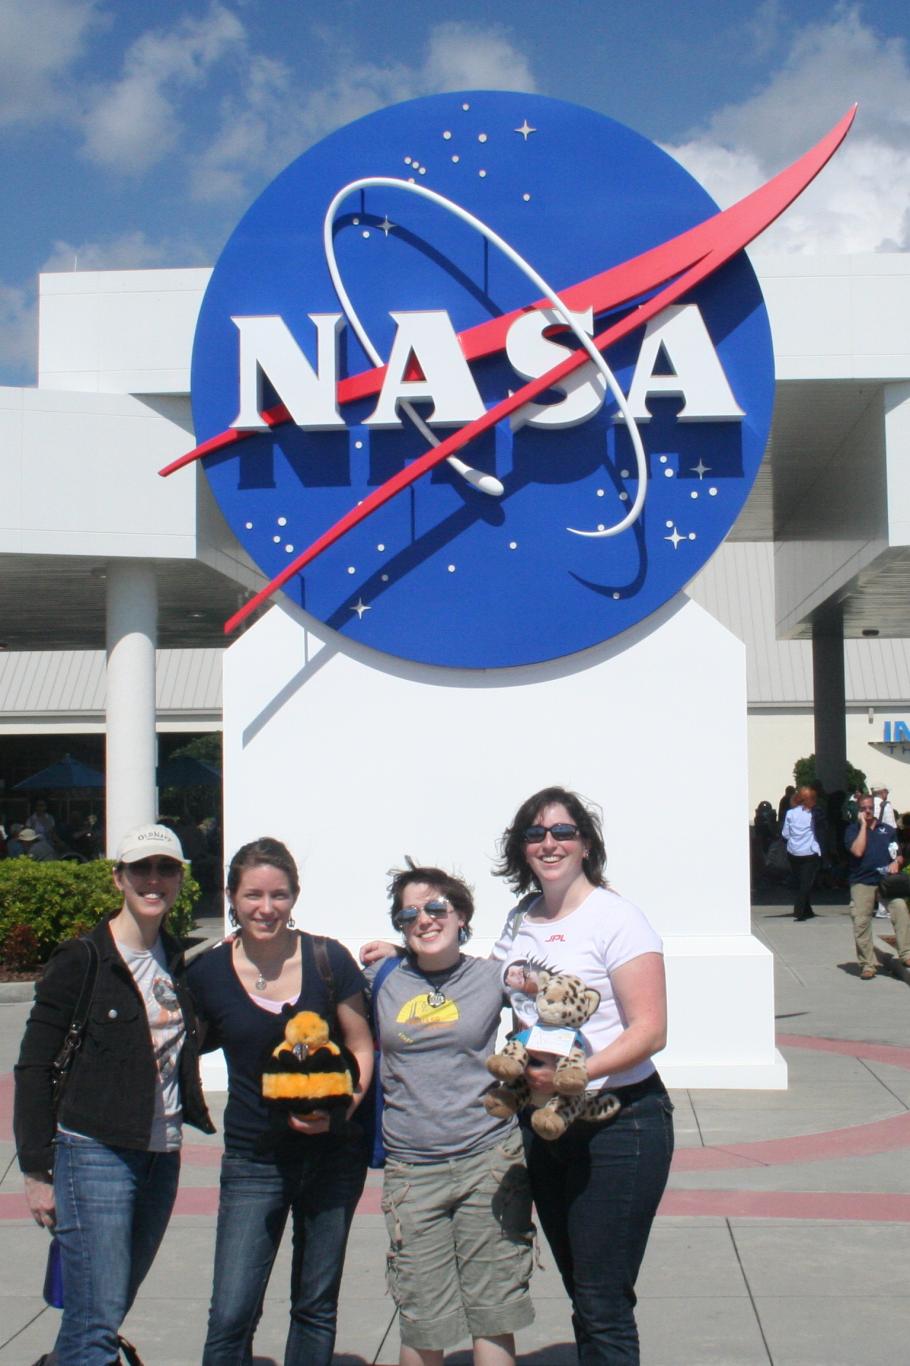 Visitors at the Kennedy Space Center